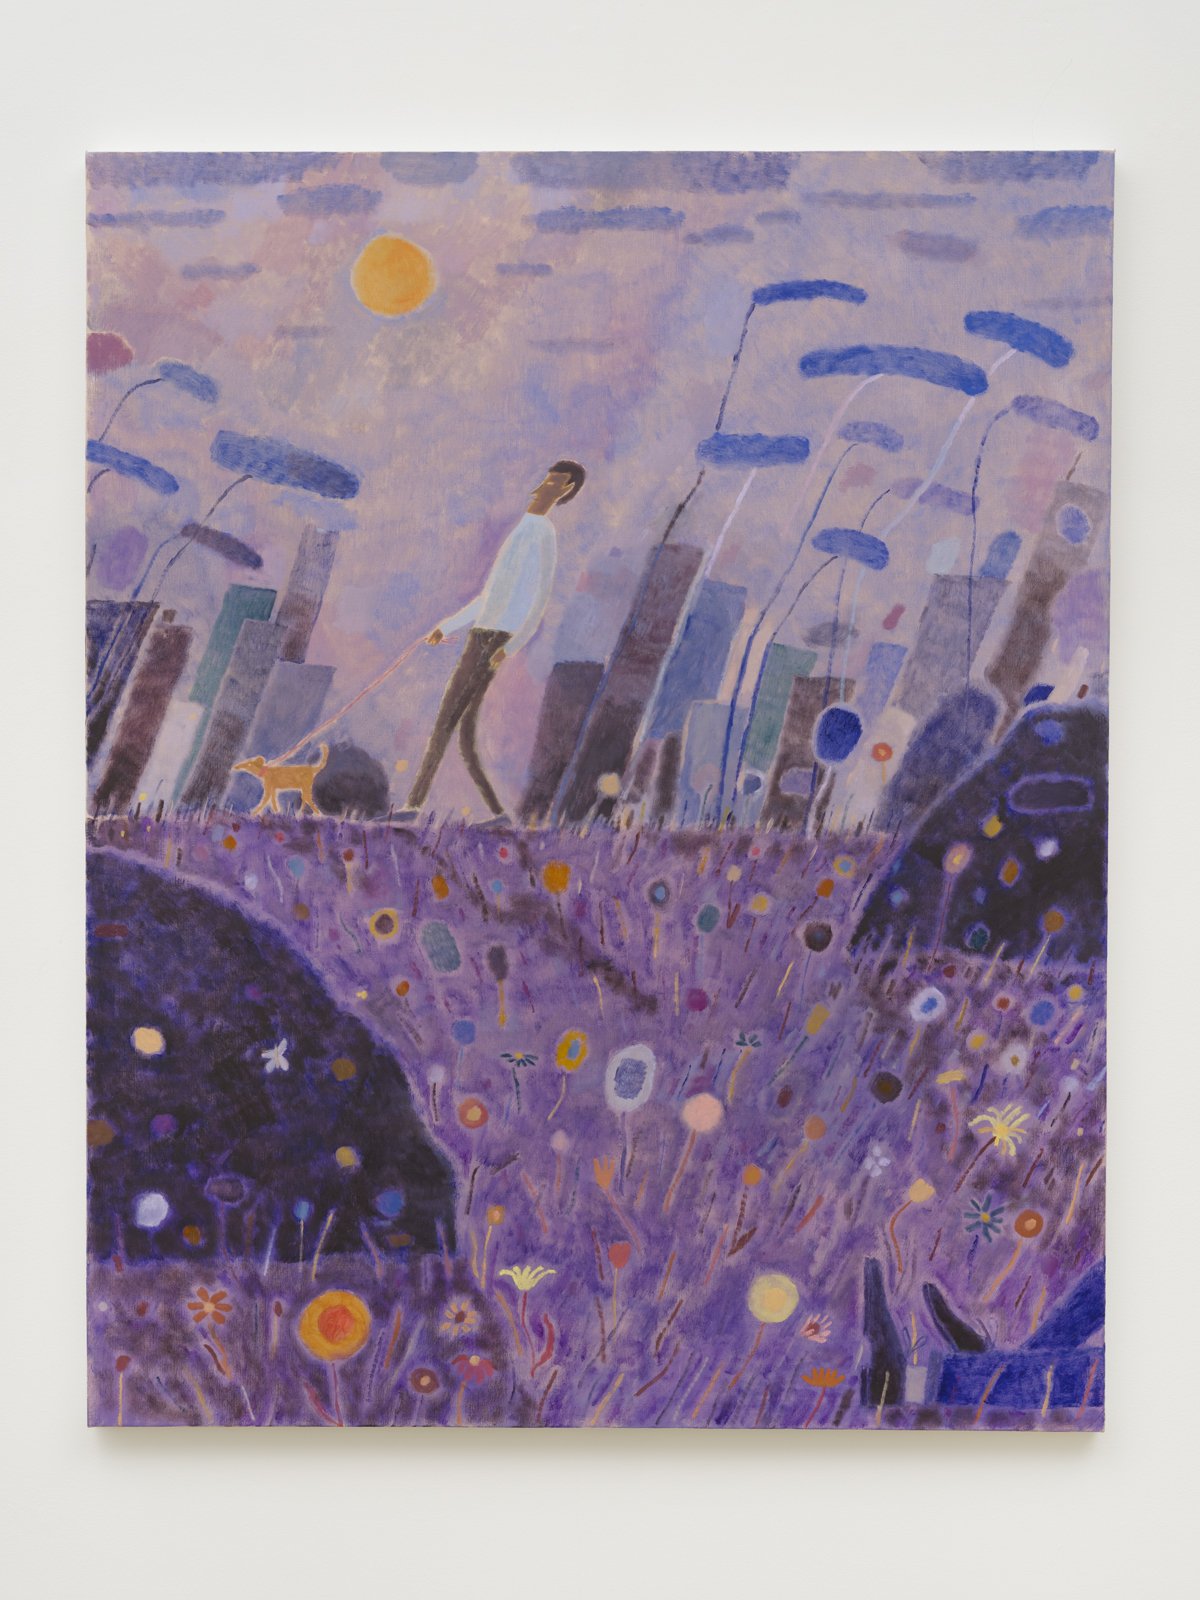  Chase Biado  Walk in the park, 2023  Oil on linen  60 x 48 in.  152.4 x 121.92 cm 